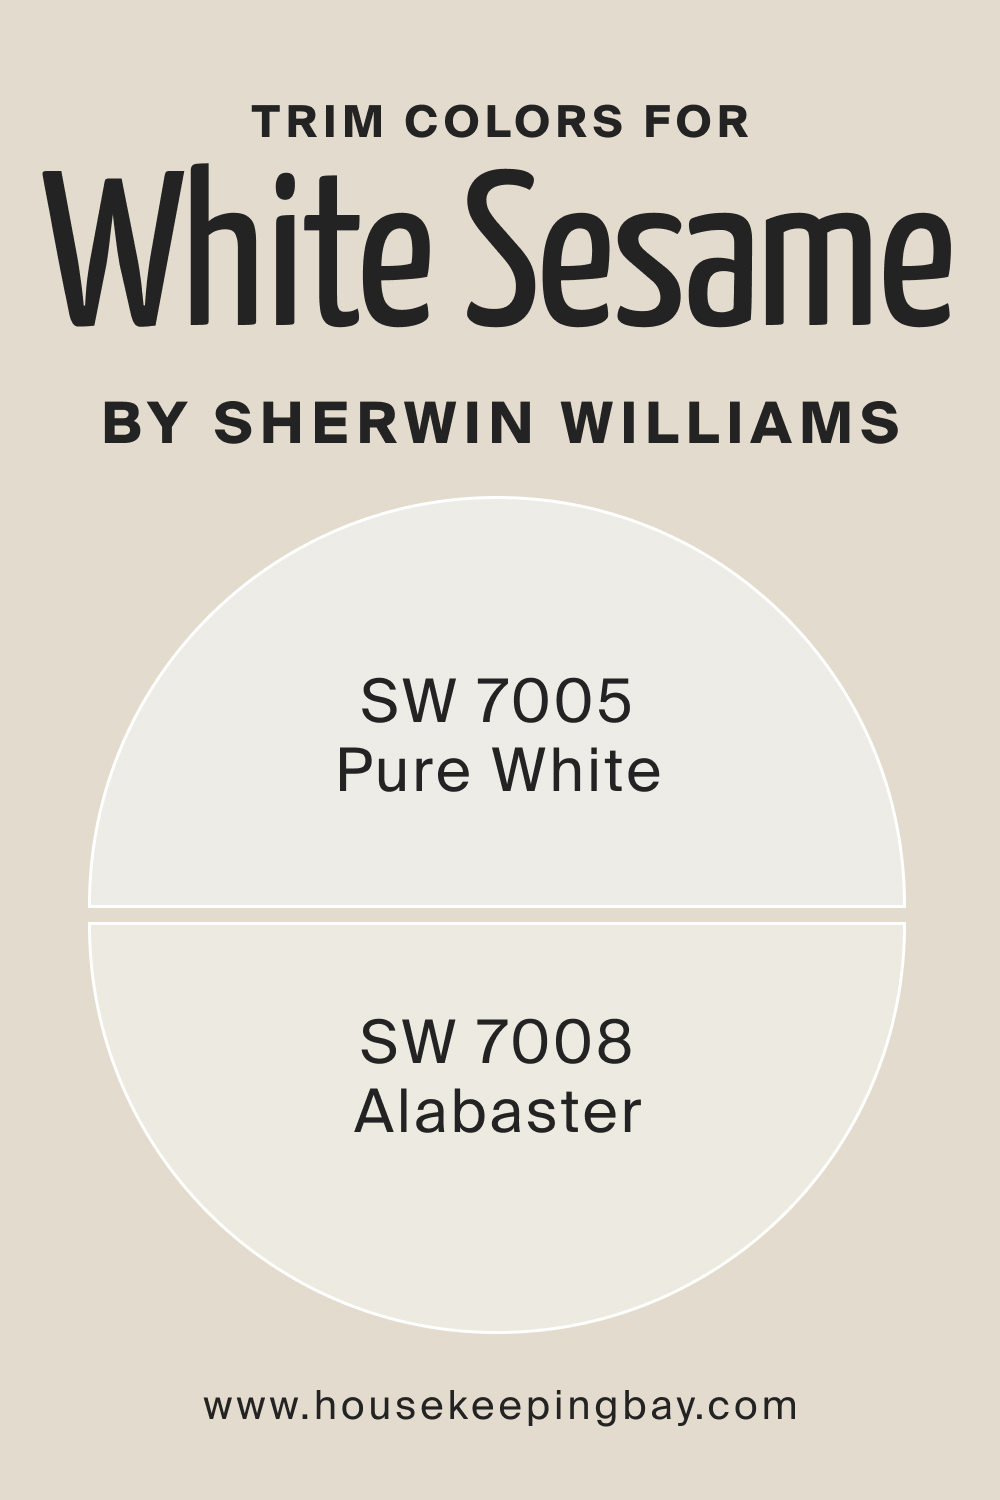 Trim Colors of SW 9586 White Sesame by Sherwin Williams